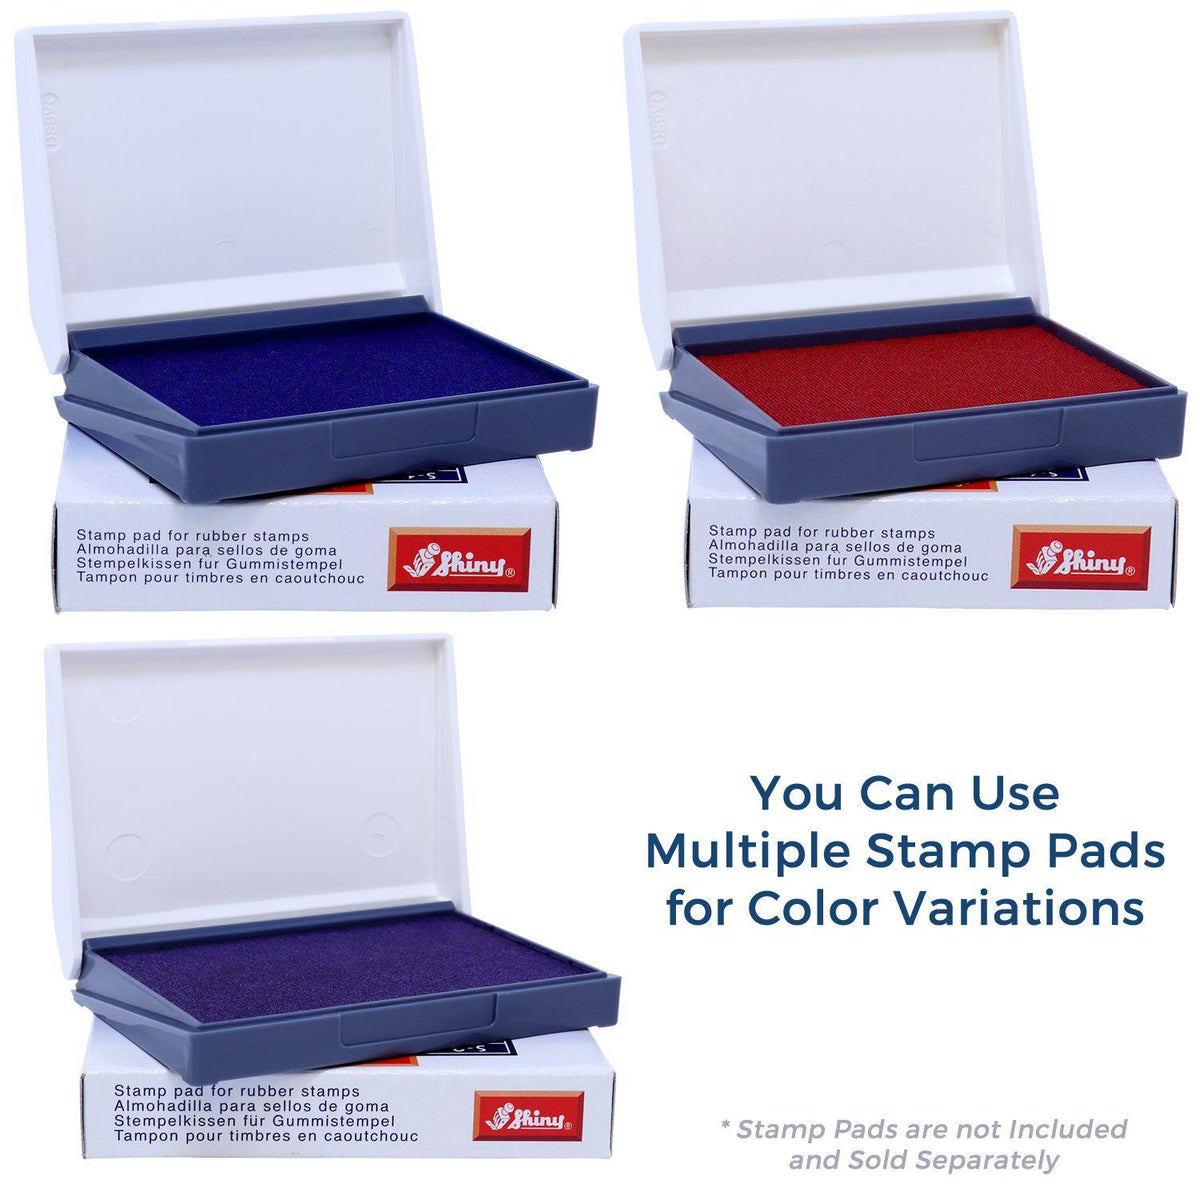 Stamp Pads for Large Narrow Expedite Rubber Stamp Available